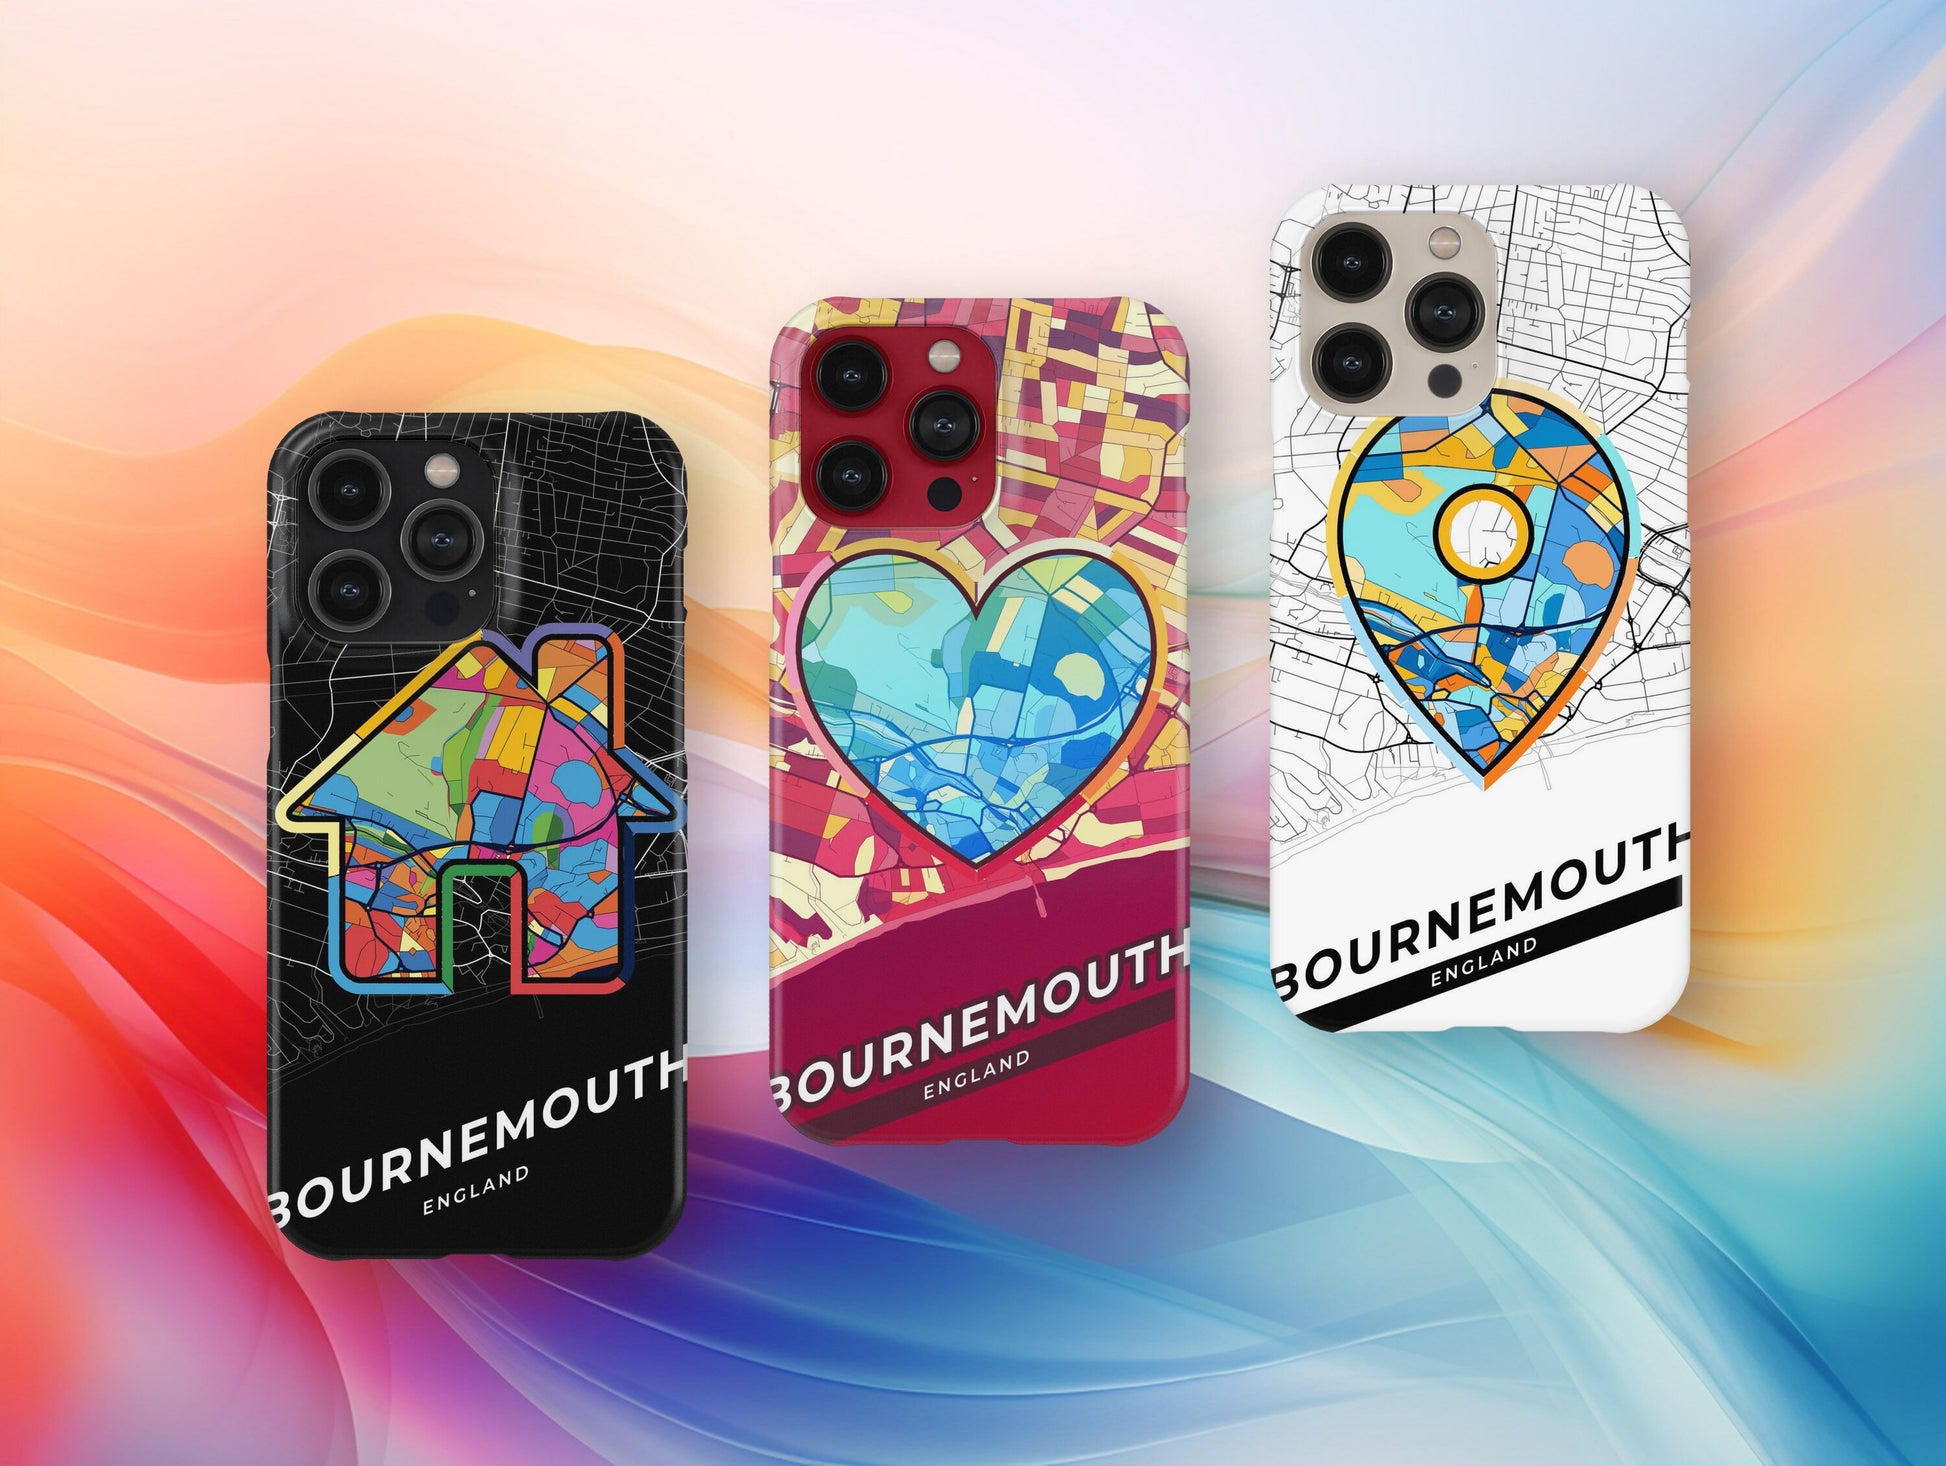 Bournemouth England slim phone case with colorful icon. Birthday, wedding or housewarming gift. Couple match cases.